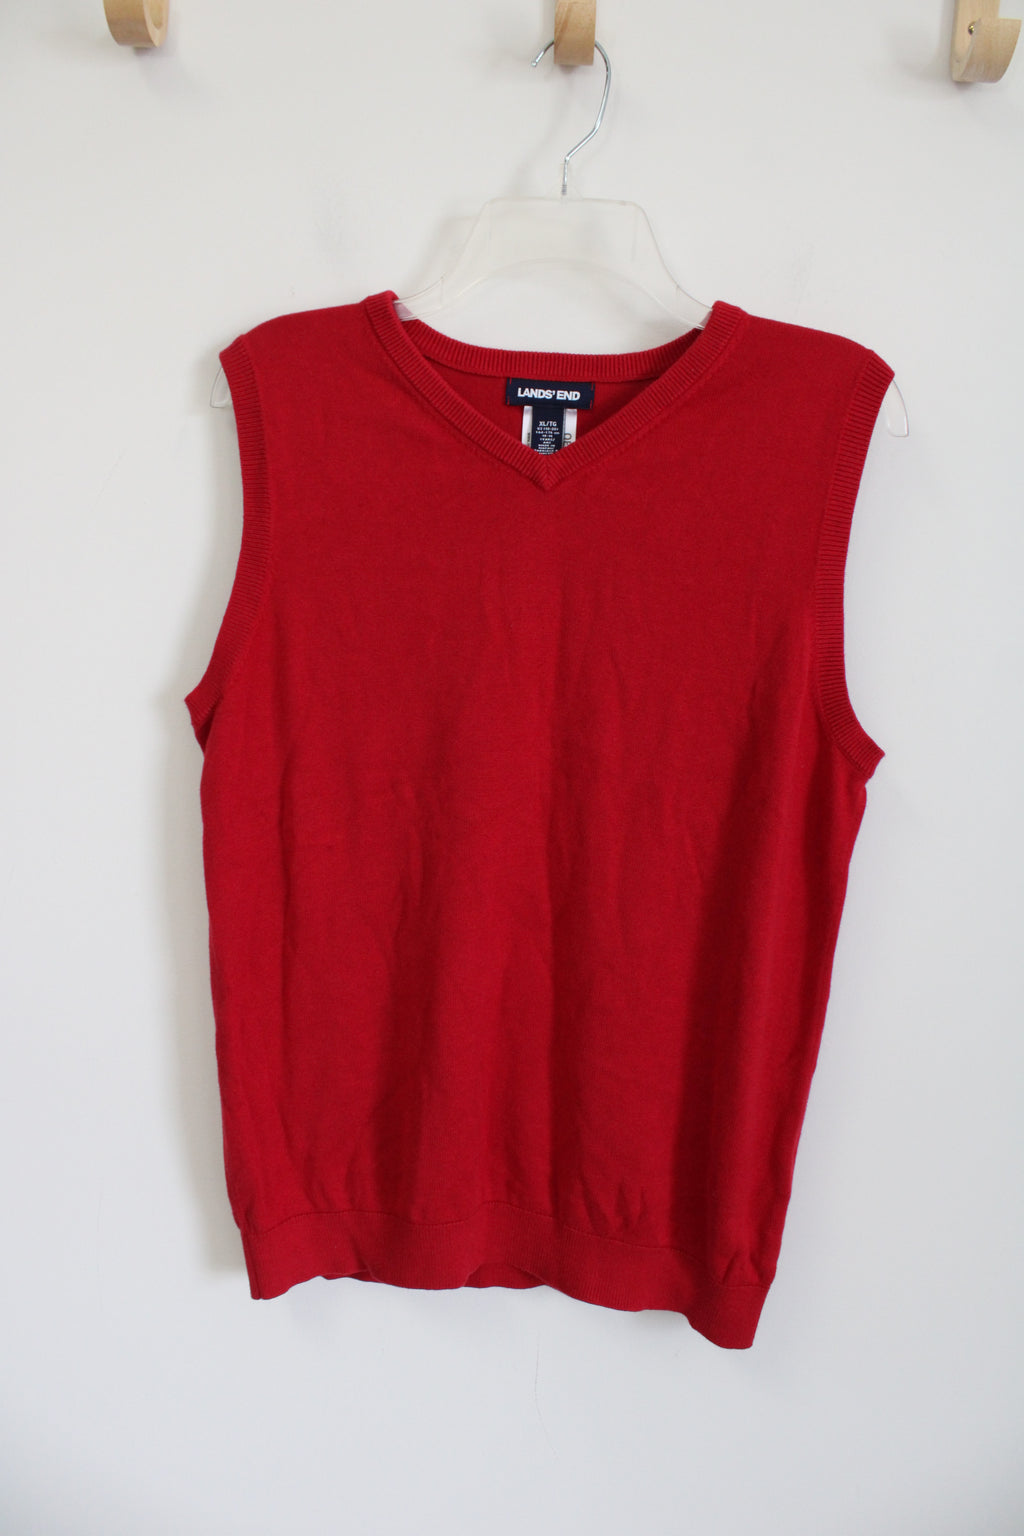 Lands' End Red Knit Sweater Vest | Youth XL (18/20)